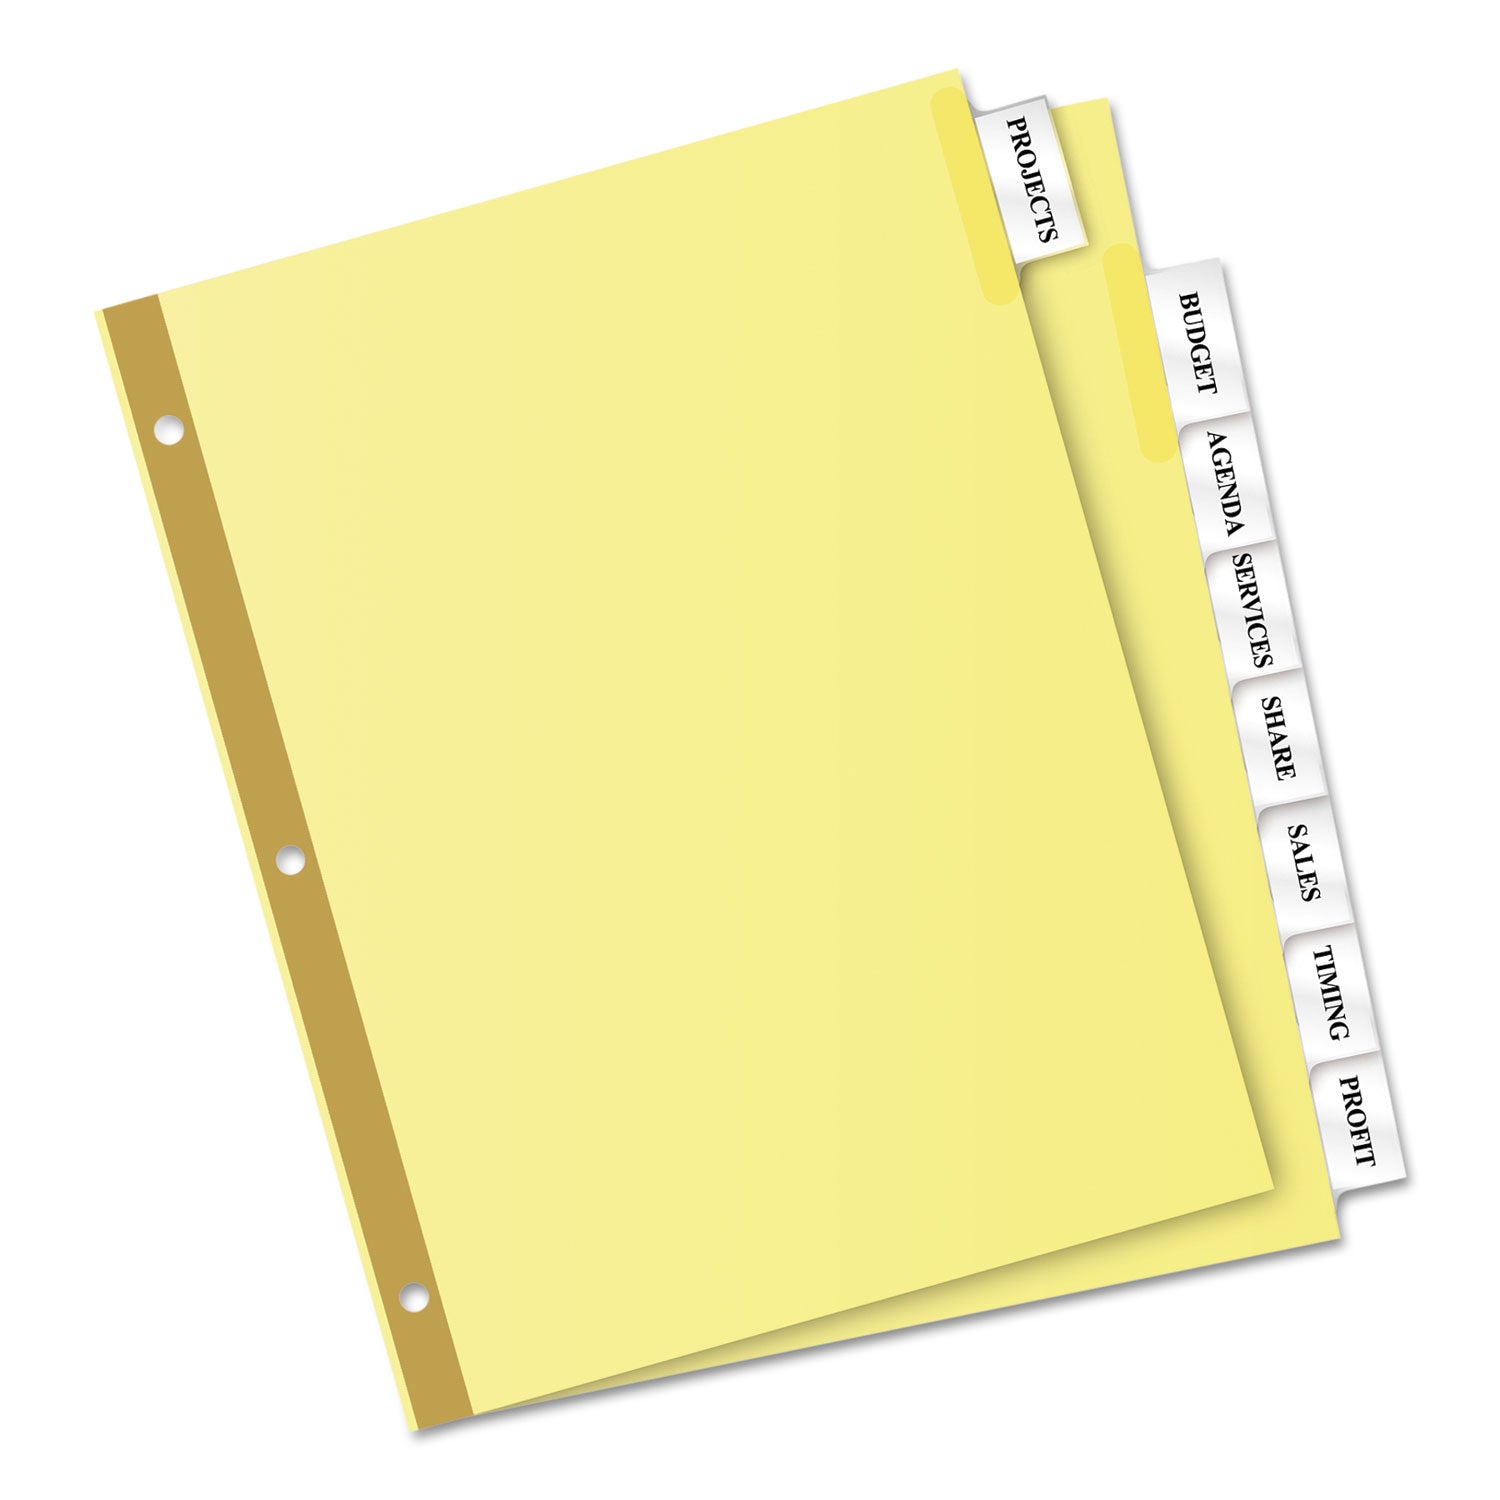 Insertable Big Tab Dividers, 8-Tab, Double-Sided Gold Edge Reinforcing, 11 x 8.5, Buff, Clear Tabs, 1 Set - 